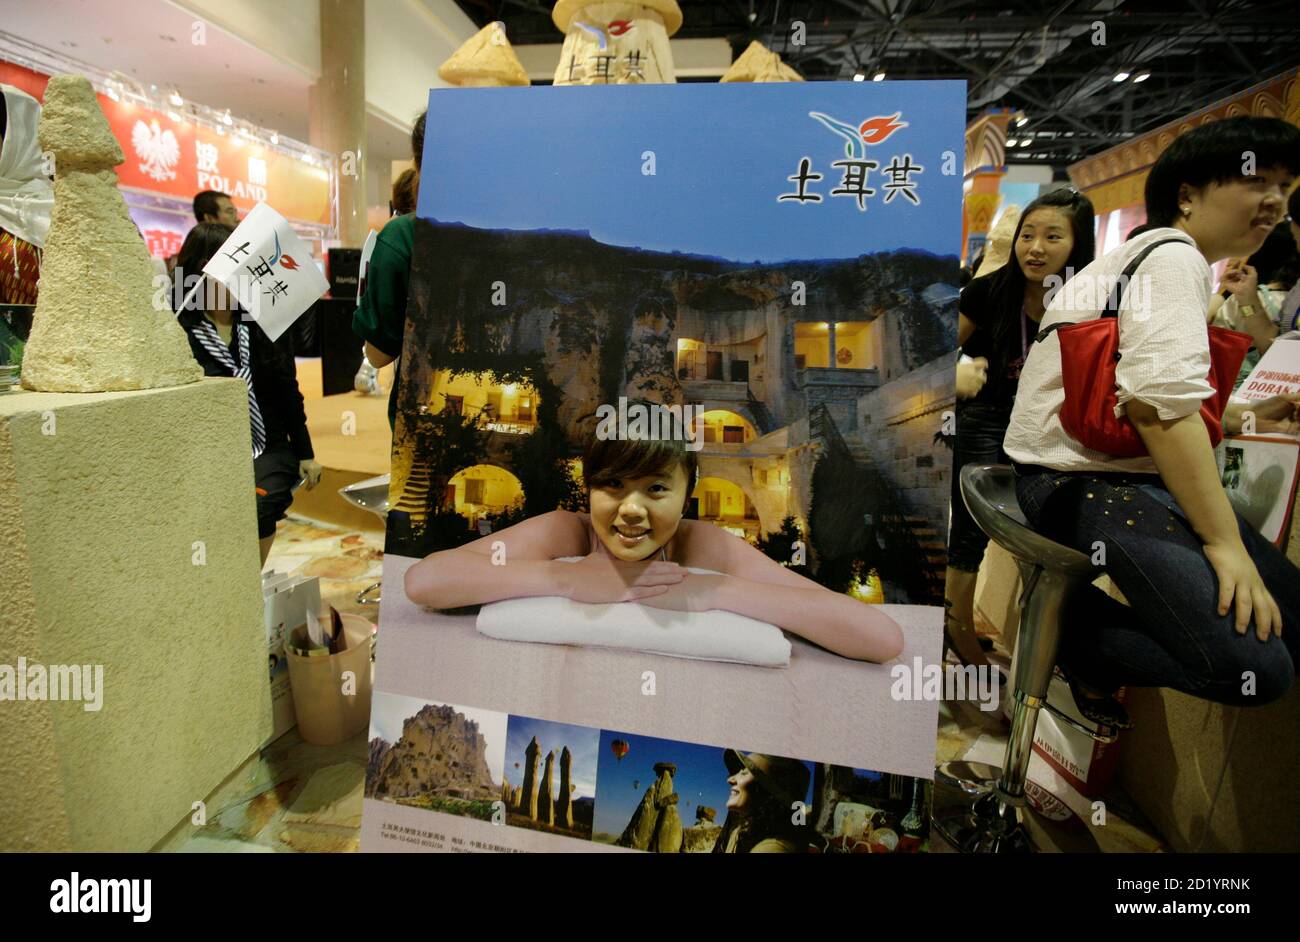 A woman poses in a hole cut in a poster at the Turkish booth at an international tourism exhibition in Beijing, June 18, 2009. REUTERS/Jason Lee (CHINA TRAVEL SOCIETY BUSINESS) Stock Photo